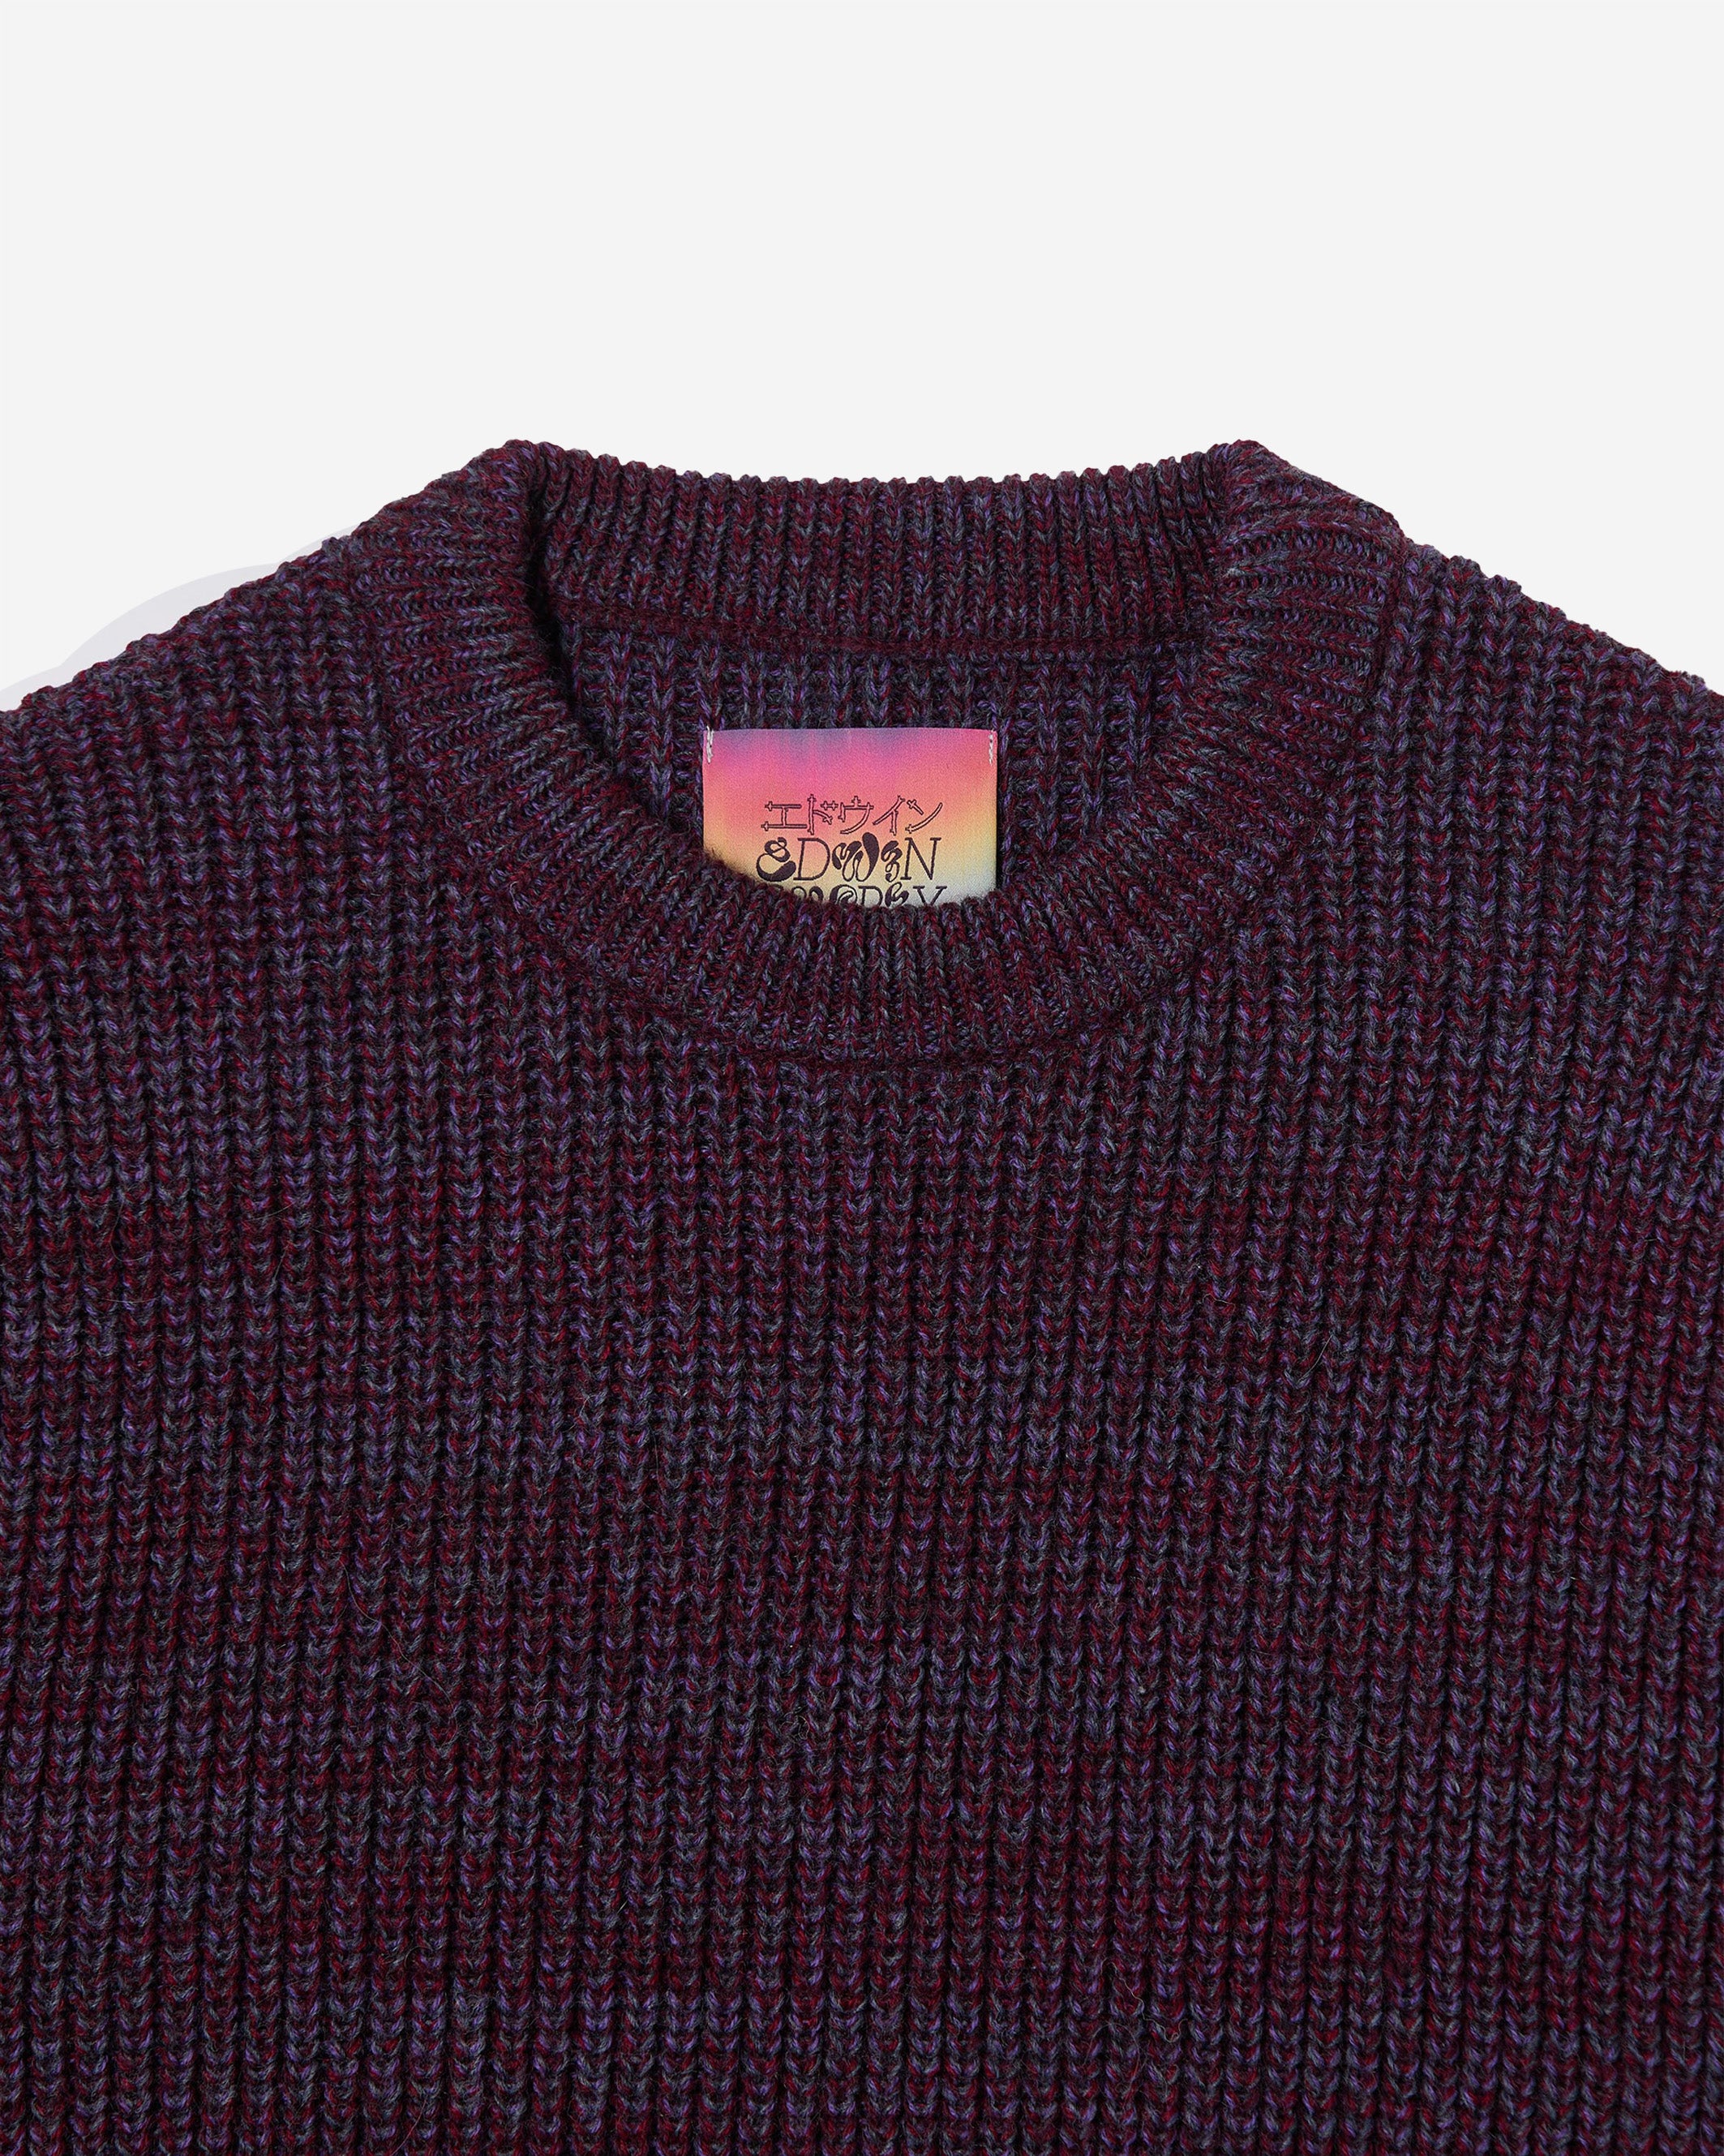 The EDWIN Meander Sweater has an oversized cut and is made from a Wool Mix. 37% Knit Blended Wool |50% Acrylic | 8% Polyamid | 5% Alpaca Oversized Fit Round collar Mixed colored Yarn